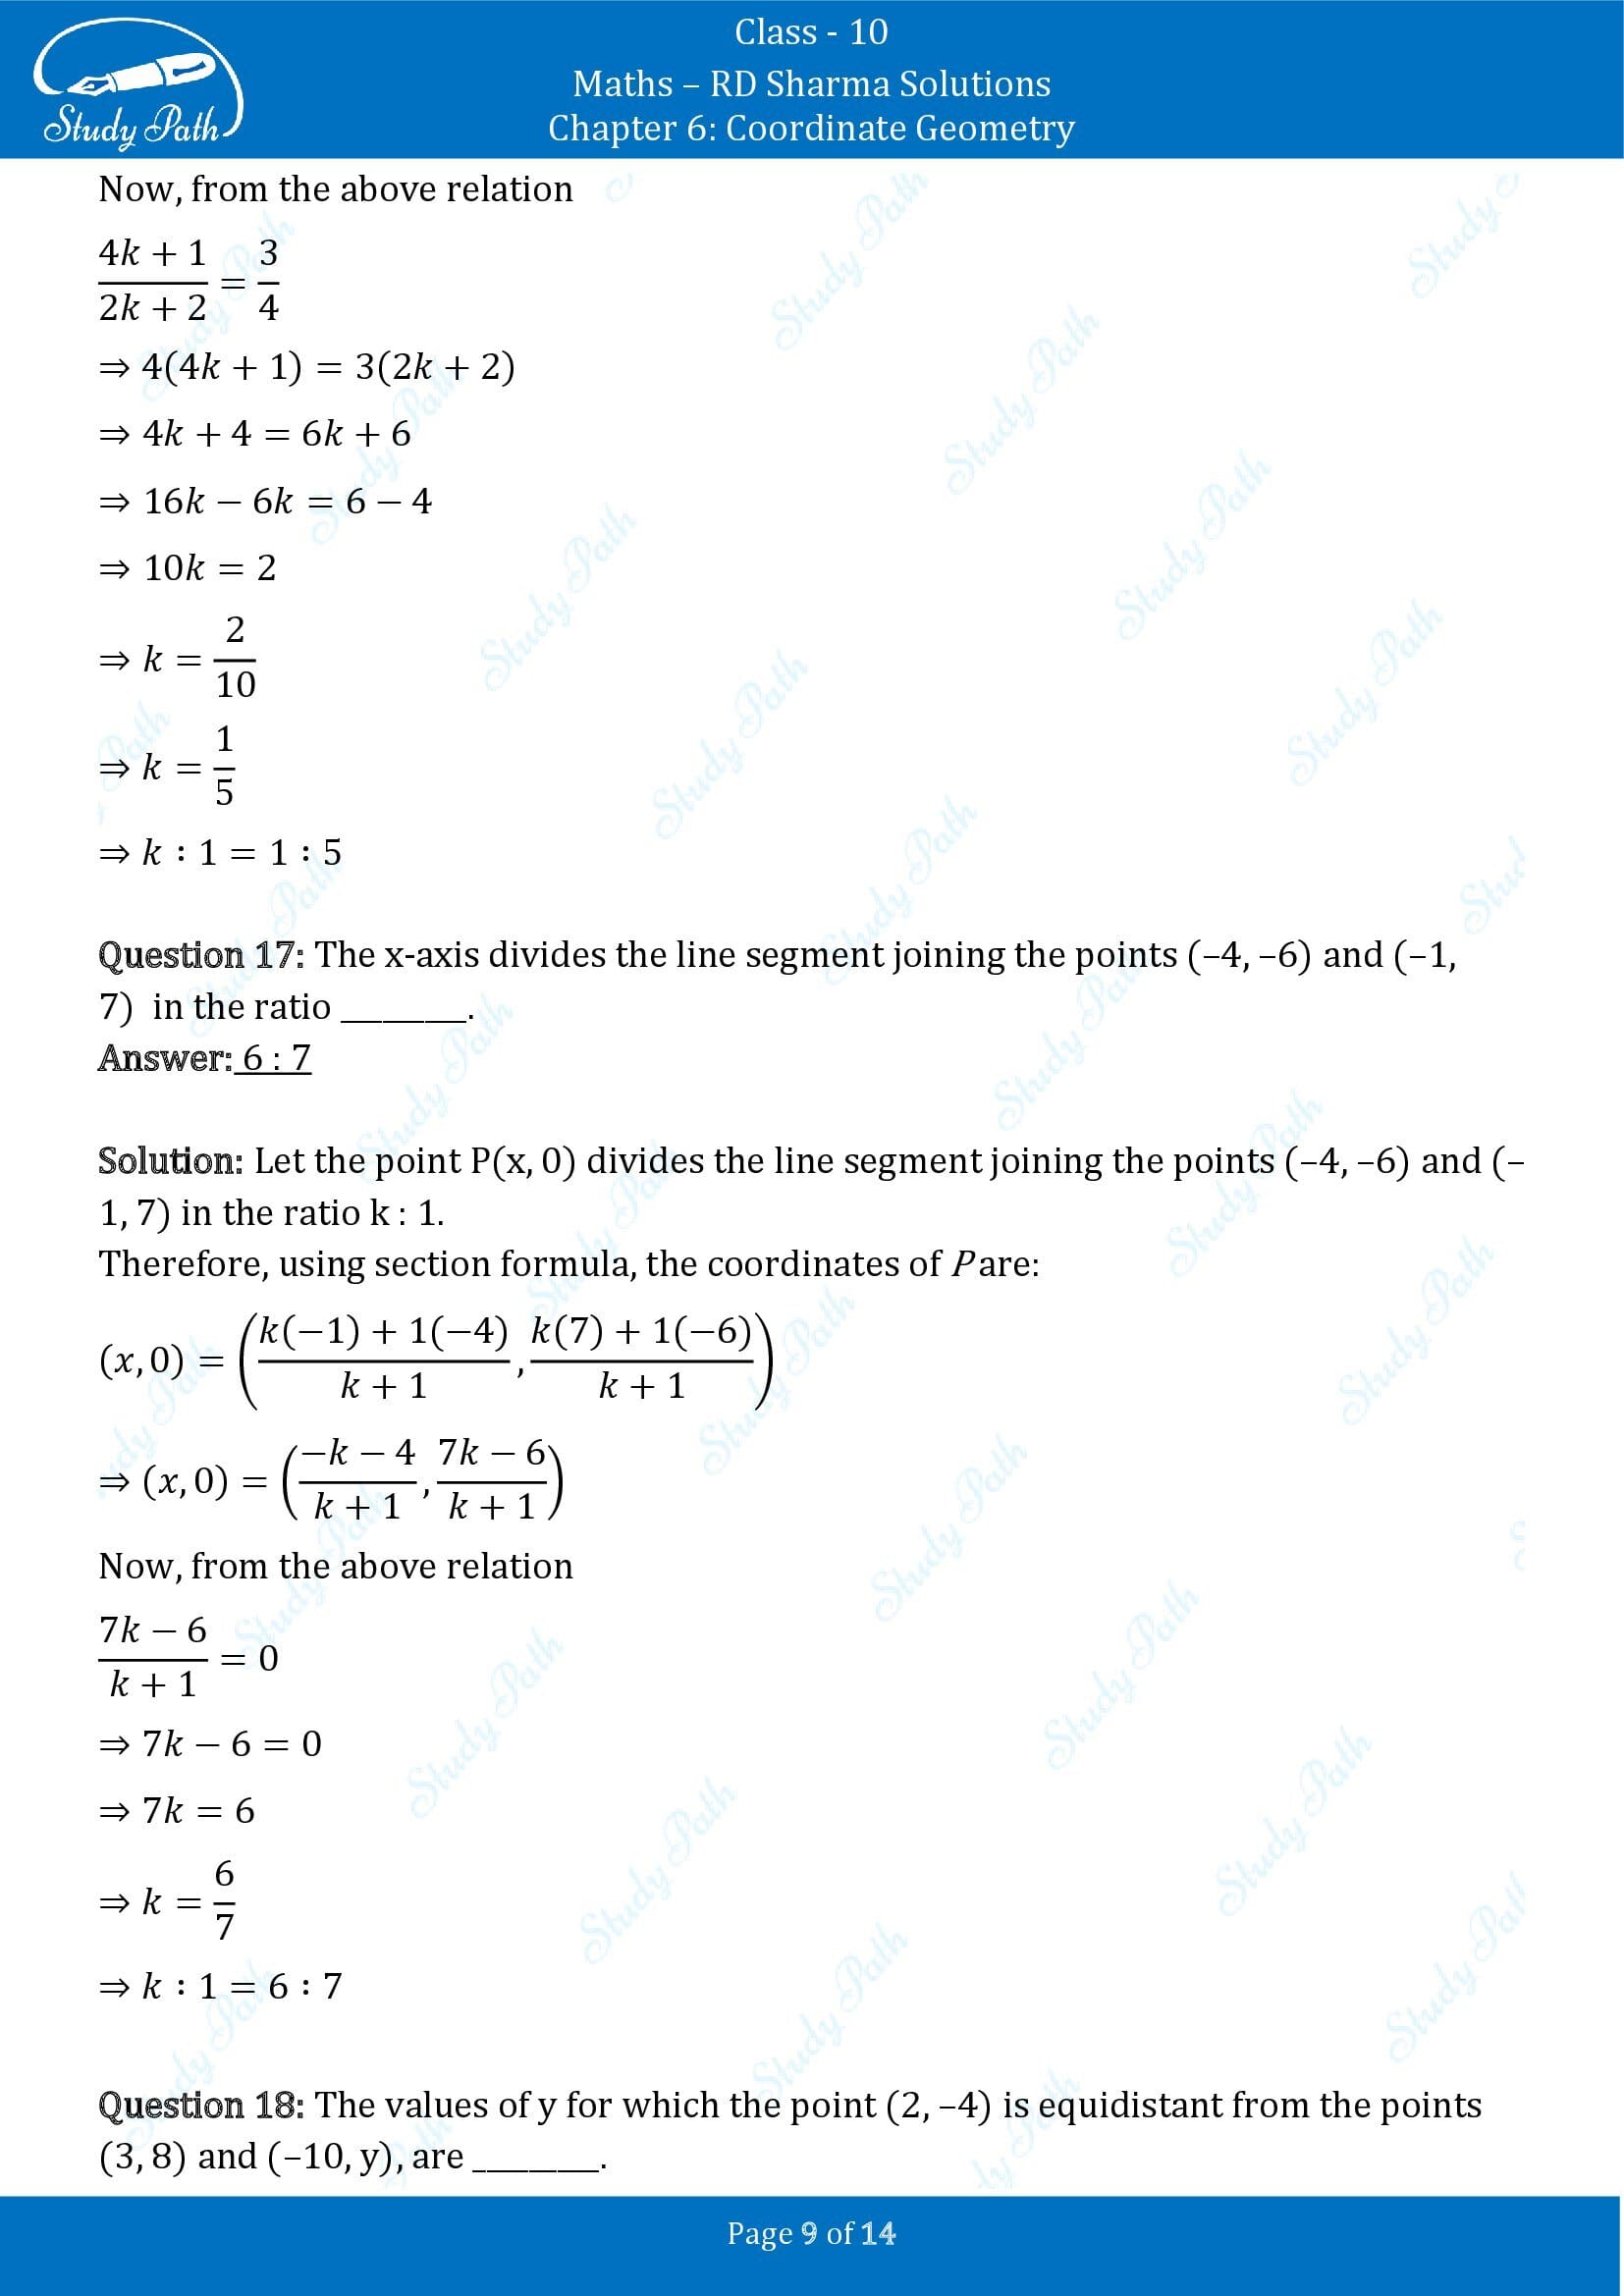 RD Sharma Solutions Class 10 Chapter 6 Coordinate Geometry Fill in the Blank Type Questions FBQs 00009